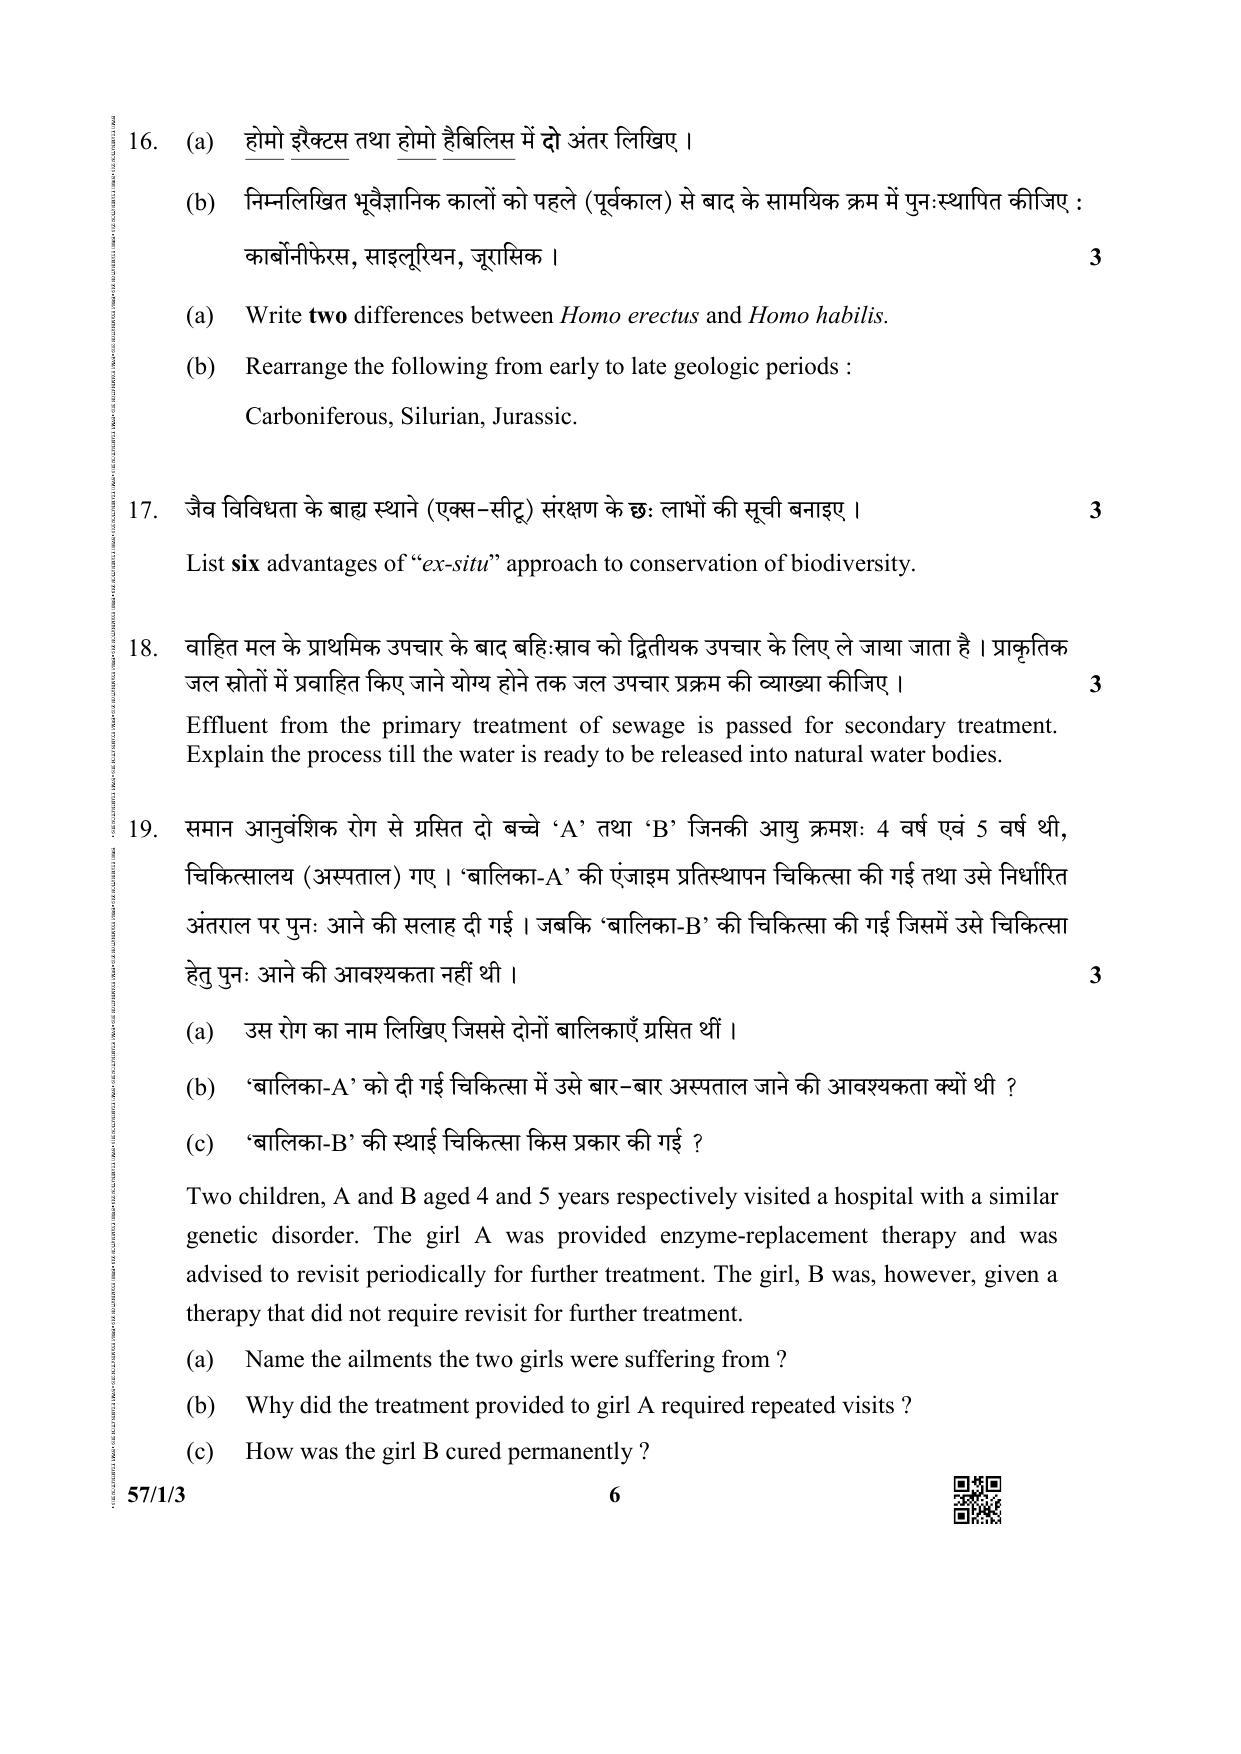 CBSE Class 12 57-3 (Biology) 2019 Question Paper - Page 6